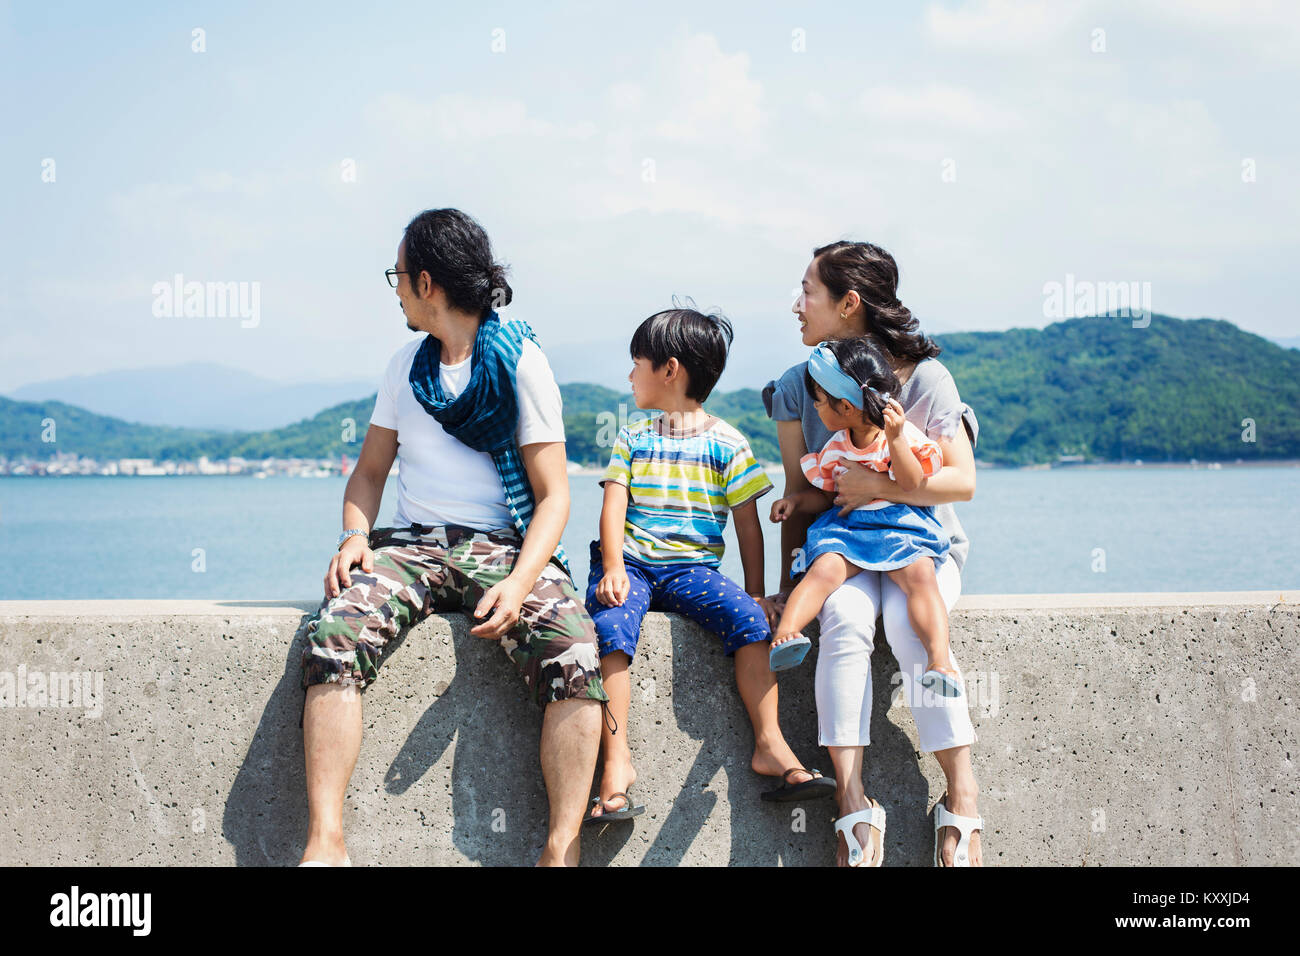 Family, man, boy and woman with young girl on her lap sitting side by side on a wall by the ocean. Stock Photo